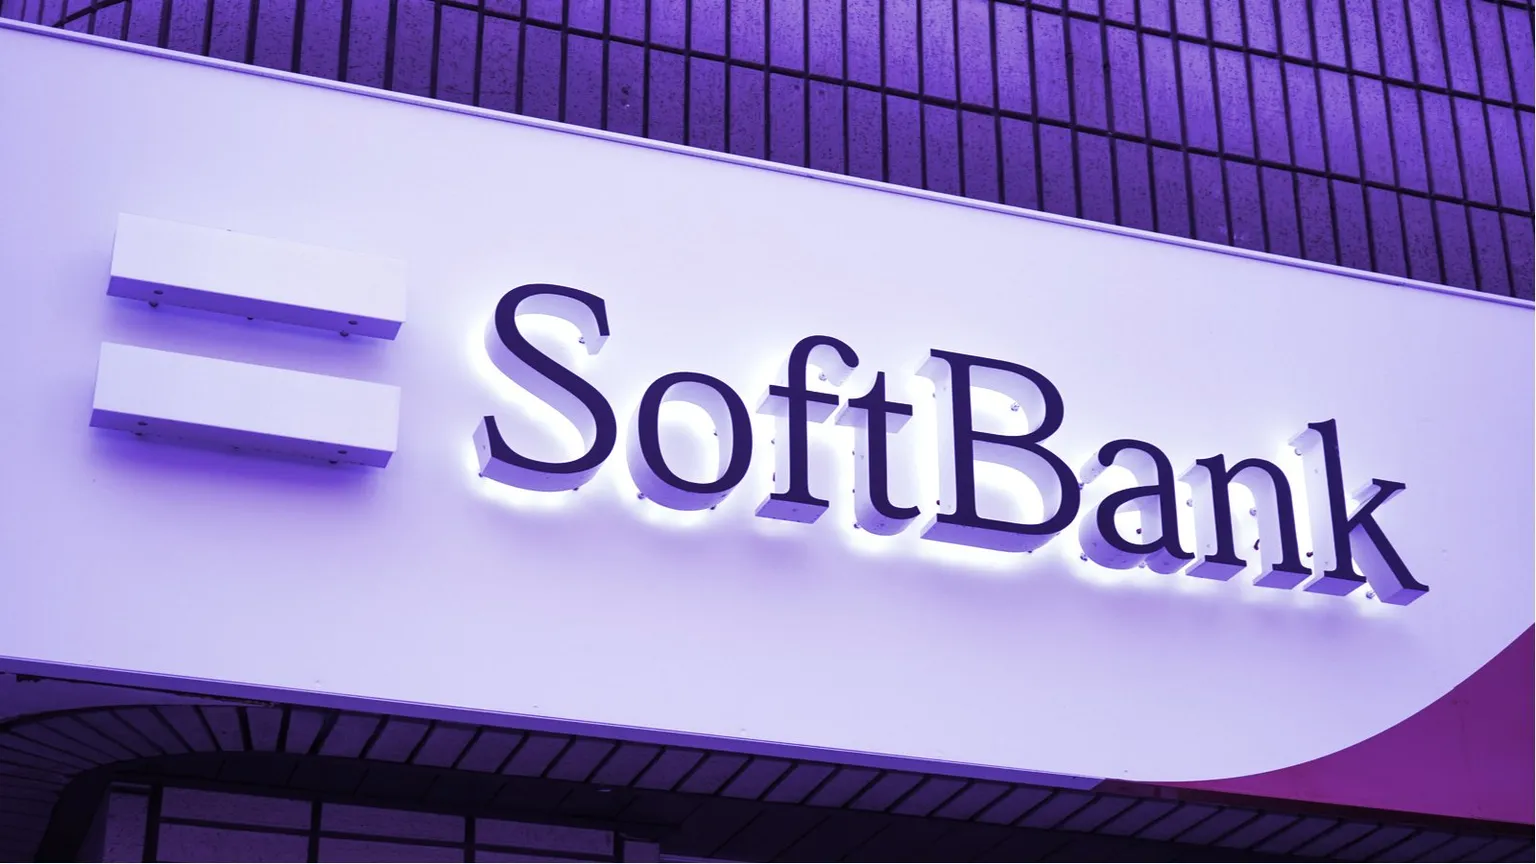 SoftBank is a multinational investment bank based in Japan. Image: Shutterstock